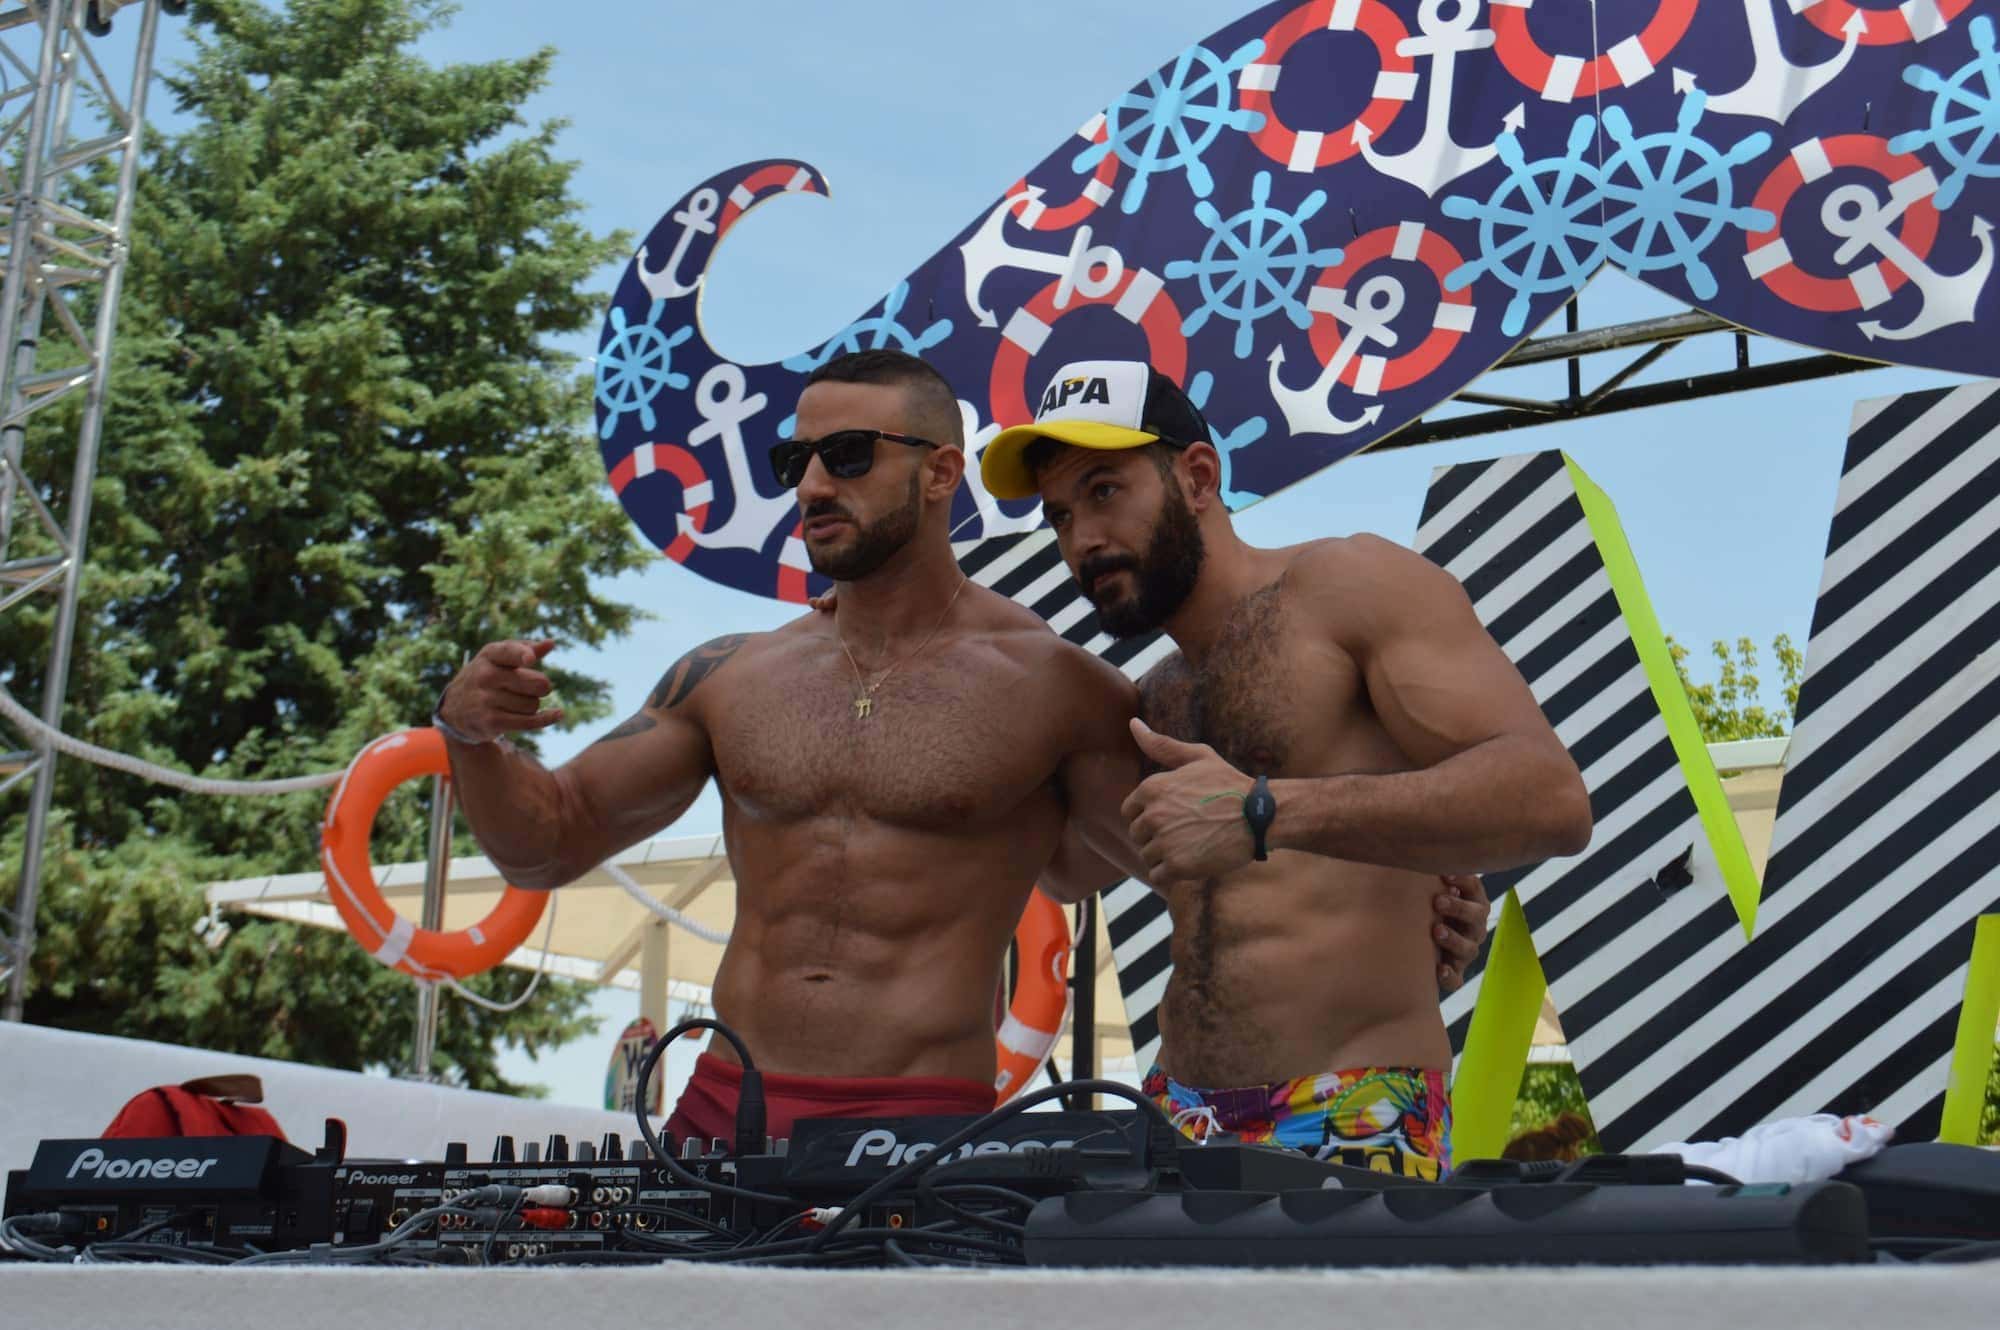 Gay Parties and Events in Munich - Travel Gay